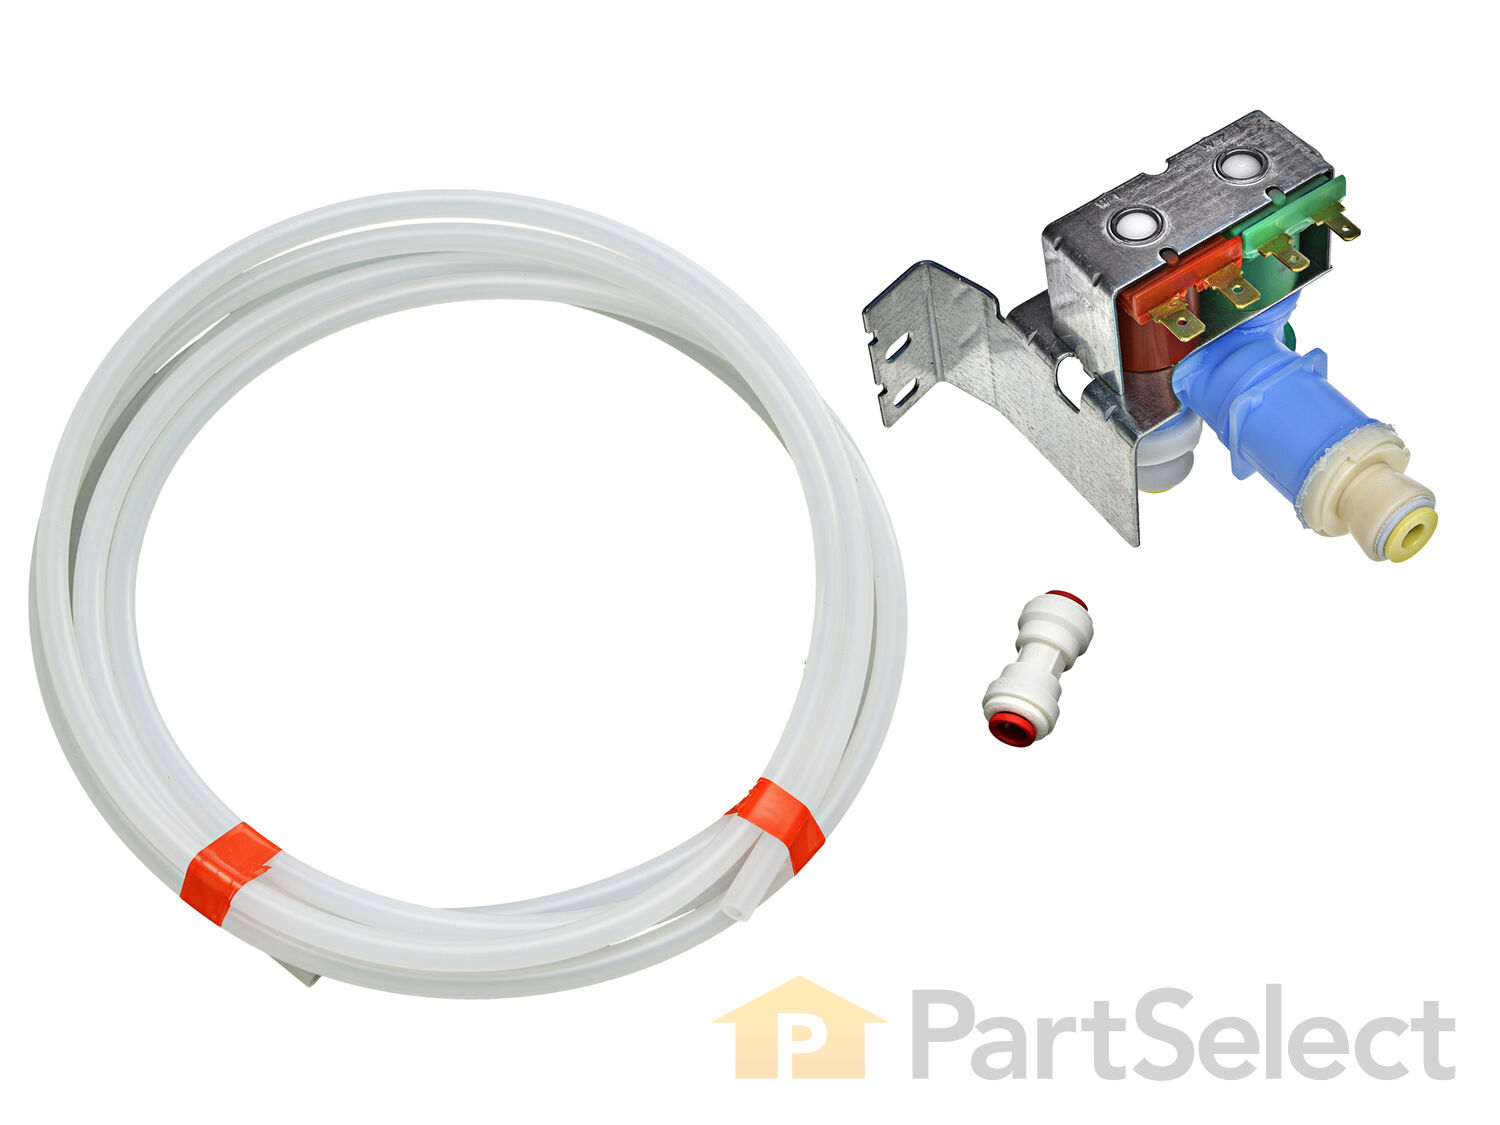 Details about   W10408179 for Whirlpool Kenmore Kitchenaid Refrigerator Water Valve for 4389177 